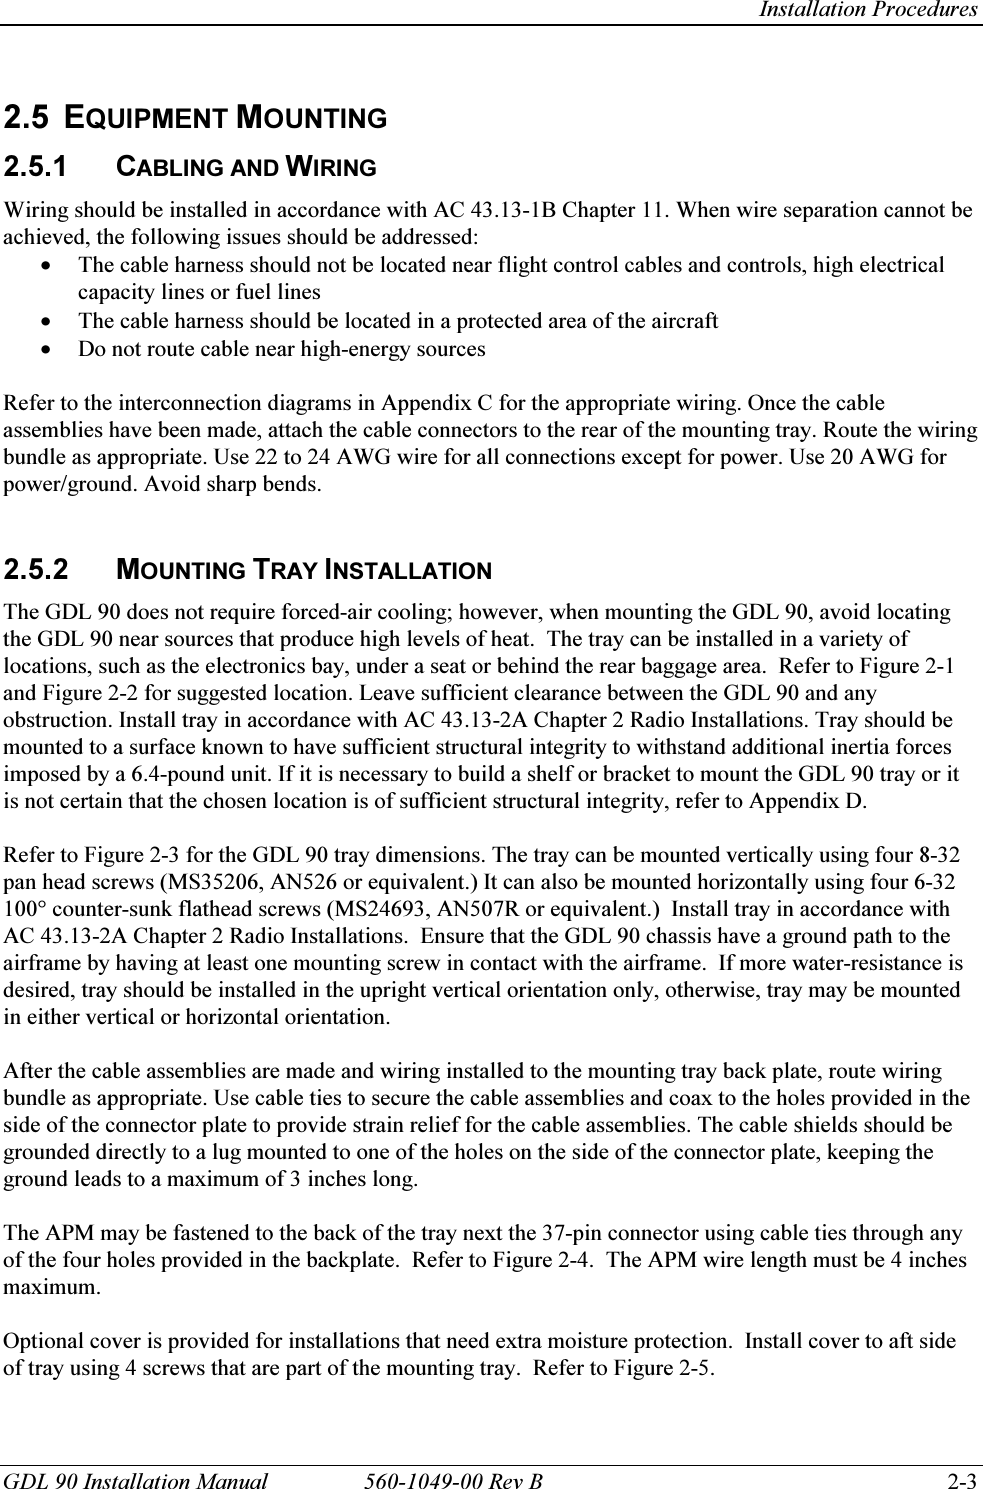   Installation Procedures GDL 90 Installation Manual  560-1049-00 Rev B    2-3  2.5 EQUIPMENT MOUNTING 2.5.1 CABLING AND WIRING Wiring should be installed in accordance with AC 43.13-1B Chapter 11. When wire separation cannot be achieved, the following issues should be addressed: • The cable harness should not be located near flight control cables and controls, high electrical capacity lines or fuel lines • The cable harness should be located in a protected area of the aircraft  • Do not route cable near high-energy sources  Refer to the interconnection diagrams in Appendix C for the appropriate wiring. Once the cable assemblies have been made, attach the cable connectors to the rear of the mounting tray. Route the wiring bundle as appropriate. Use 22 to 24 AWG wire for all connections except for power. Use 20 AWG for power/ground. Avoid sharp bends.   2.5.2 MOUNTING TRAY INSTALLATION The GDL 90 does not require forced-air cooling; however, when mounting the GDL 90, avoid locating the GDL 90 near sources that produce high levels of heat.  The tray can be installed in a variety of locations, such as the electronics bay, under a seat or behind the rear baggage area.  Refer to Figure 2-1 and Figure 2-2 for suggested location. Leave sufficient clearance between the GDL 90 and any obstruction. Install tray in accordance with AC 43.13-2A Chapter 2 Radio Installations. Tray should be mounted to a surface known to have sufficient structural integrity to withstand additional inertia forces imposed by a 6.4-pound unit. If it is necessary to build a shelf or bracket to mount the GDL 90 tray or it is not certain that the chosen location is of sufficient structural integrity, refer to Appendix D.  Refer to Figure 2-3 for the GDL 90 tray dimensions. The tray can be mounted vertically using four 8-32 pan head screws (MS35206, AN526 or equivalent.) It can also be mounted horizontally using four 6-32 100° counter-sunk flathead screws (MS24693, AN507R or equivalent.)  Install tray in accordance with AC 43.13-2A Chapter 2 Radio Installations.  Ensure that the GDL 90 chassis have a ground path to the airframe by having at least one mounting screw in contact with the airframe.  If more water-resistance is desired, tray should be installed in the upright vertical orientation only, otherwise, tray may be mounted in either vertical or horizontal orientation.  After the cable assemblies are made and wiring installed to the mounting tray back plate, route wiring bundle as appropriate. Use cable ties to secure the cable assemblies and coax to the holes provided in the side of the connector plate to provide strain relief for the cable assemblies. The cable shields should be grounded directly to a lug mounted to one of the holes on the side of the connector plate, keeping the ground leads to a maximum of 3 inches long.  The APM may be fastened to the back of the tray next the 37-pin connector using cable ties through any of the four holes provided in the backplate.  Refer to Figure 2-4.  The APM wire length must be 4 inches maximum.  Optional cover is provided for installations that need extra moisture protection.  Install cover to aft side of tray using 4 screws that are part of the mounting tray.  Refer to Figure 2-5. 